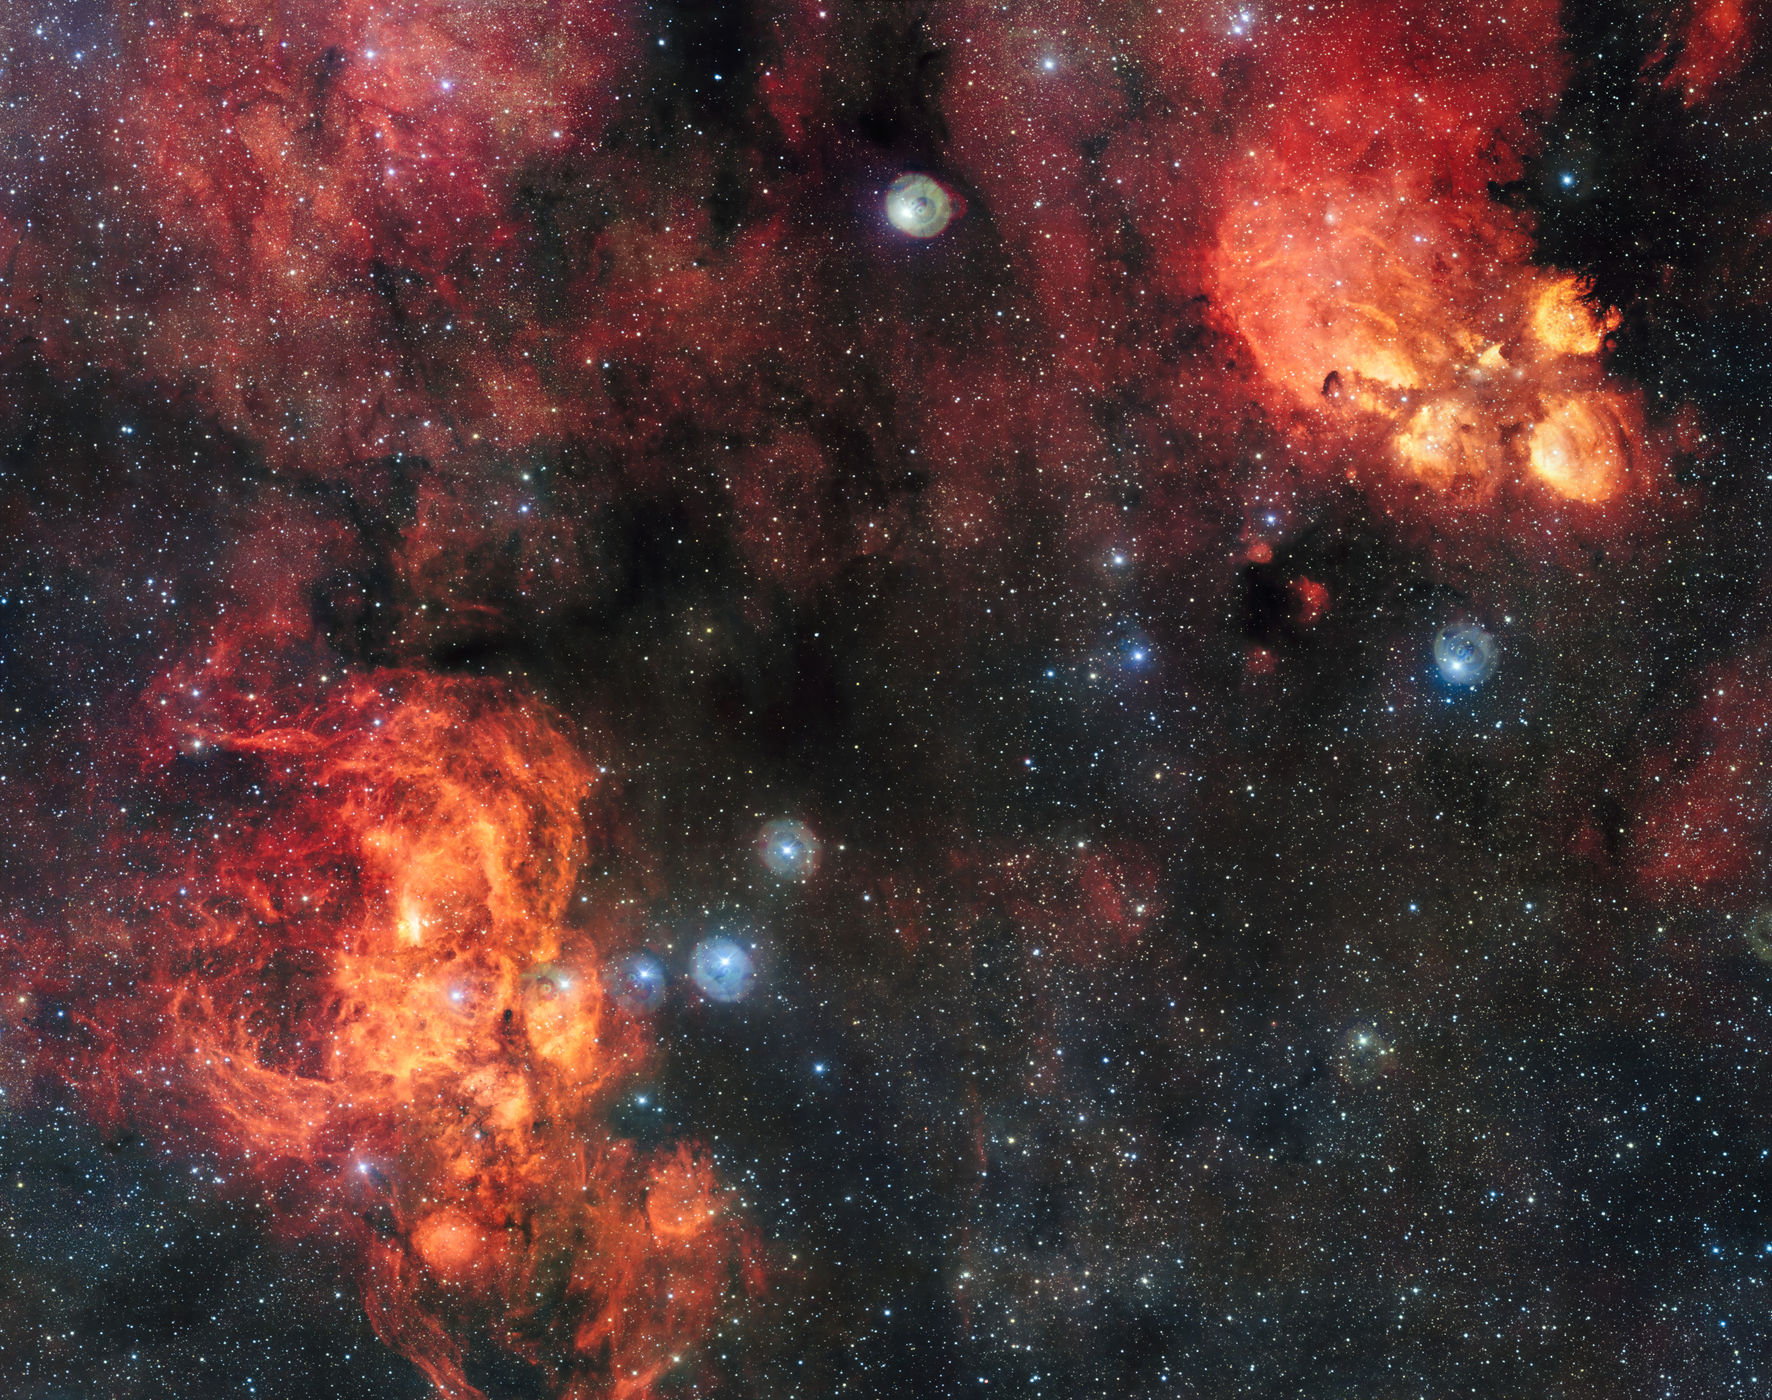 This image, taken from the VLT Survey Telescope, shows the Cat's Paw Nebula (right) and the Lobster Nebula (left).